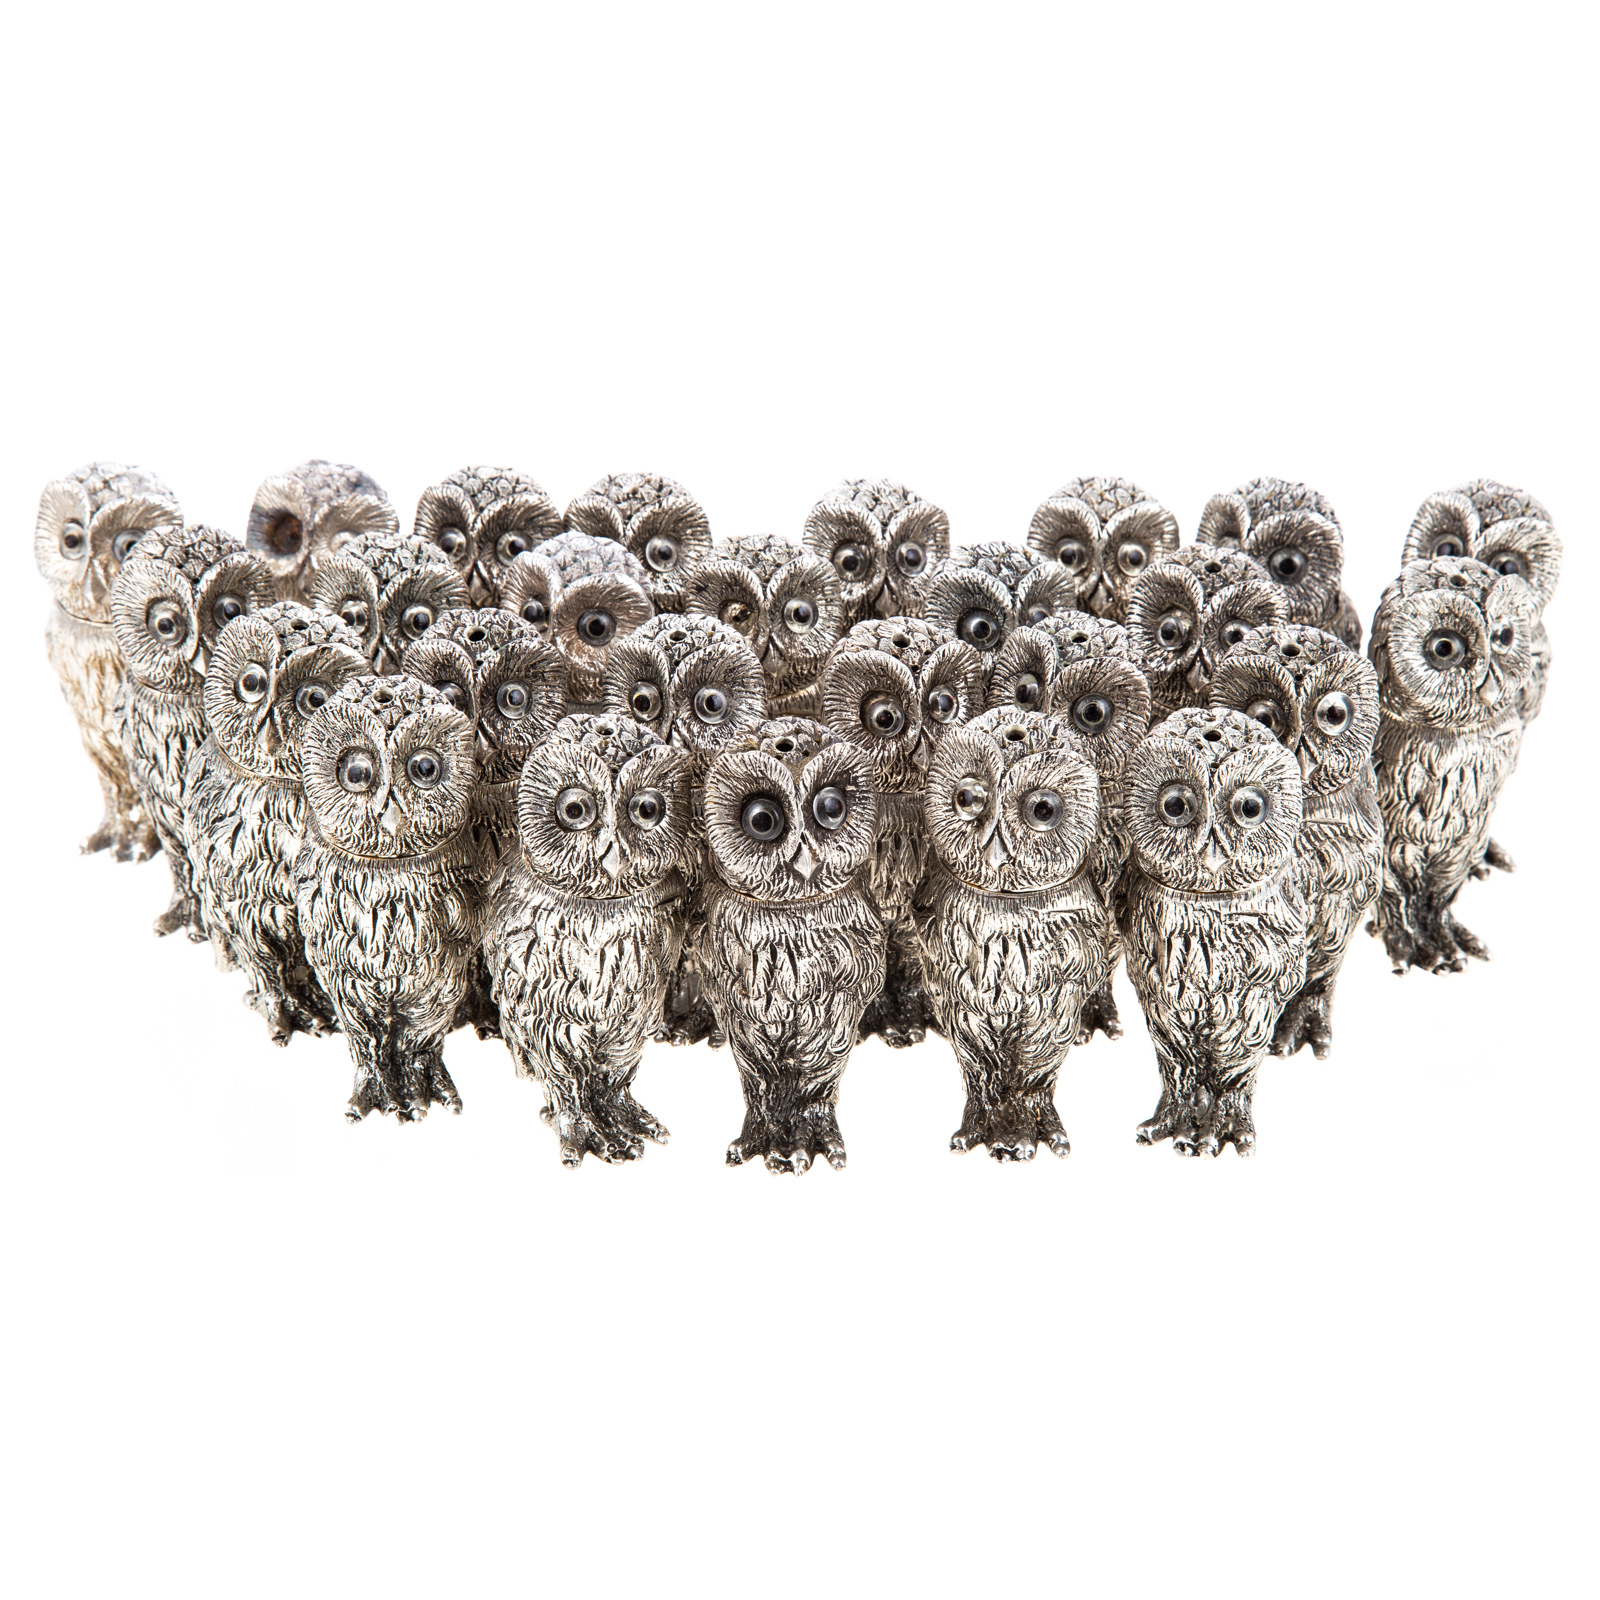 13 PAIRS ITALIAN STERLING OWL-FORM